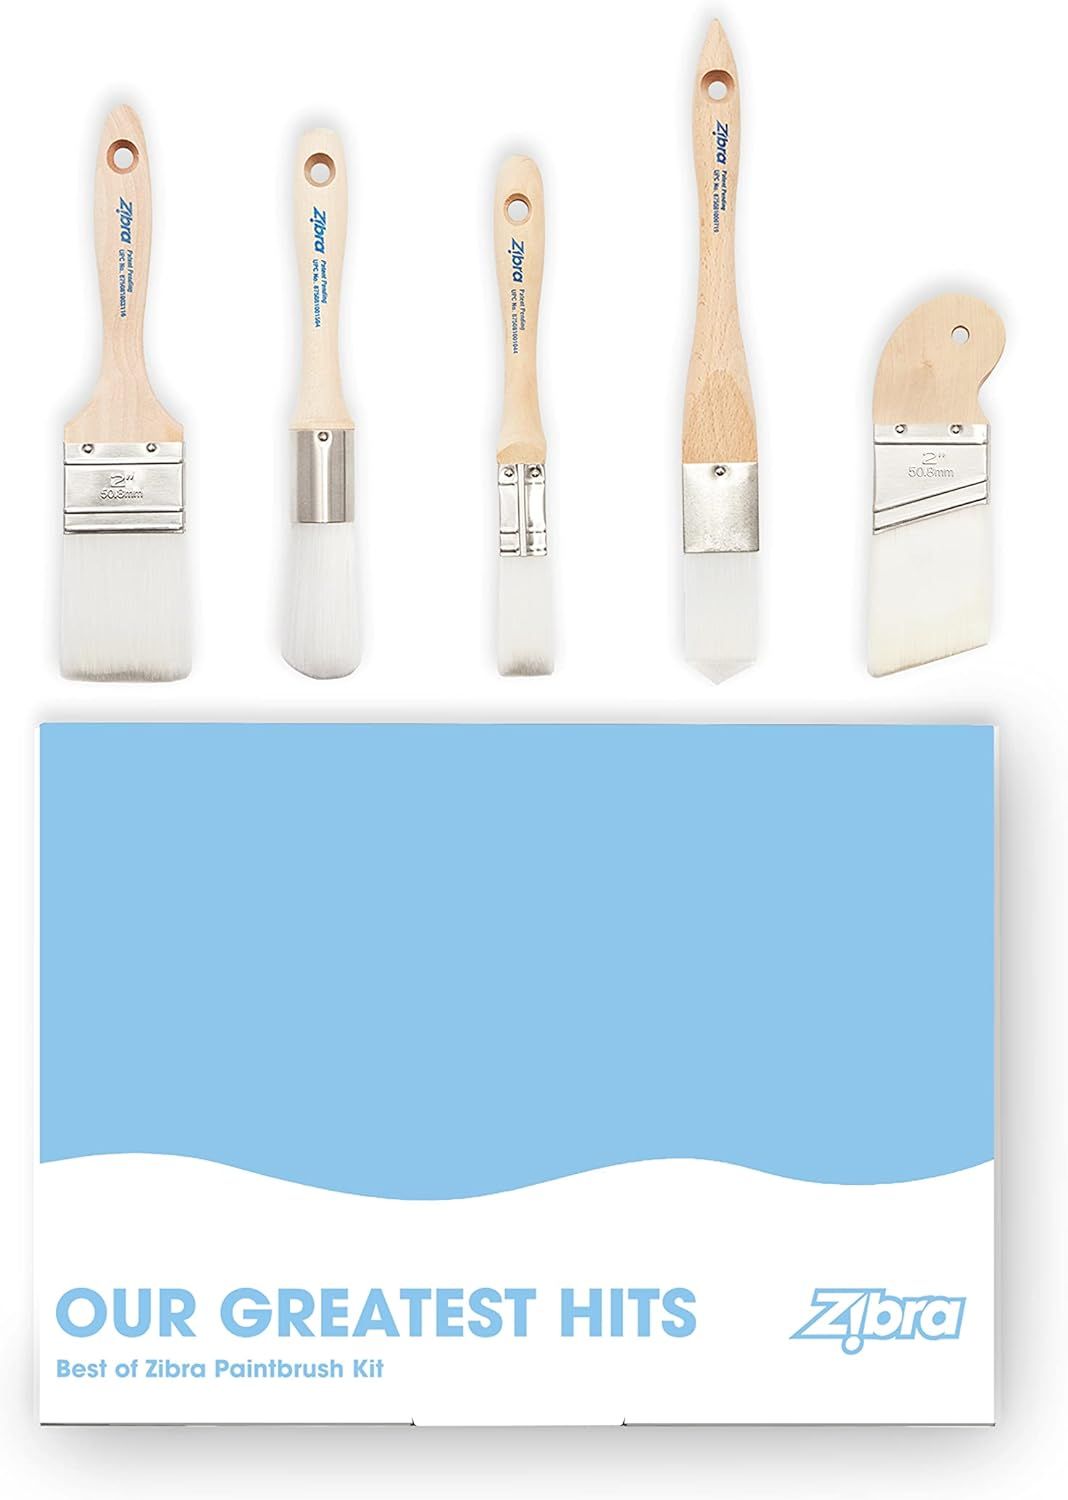 Premium Paint Brush Set - 5 Pieces- Great for Furniture or Crafting -Featuring The Best of Zibra! | Amazon (US)